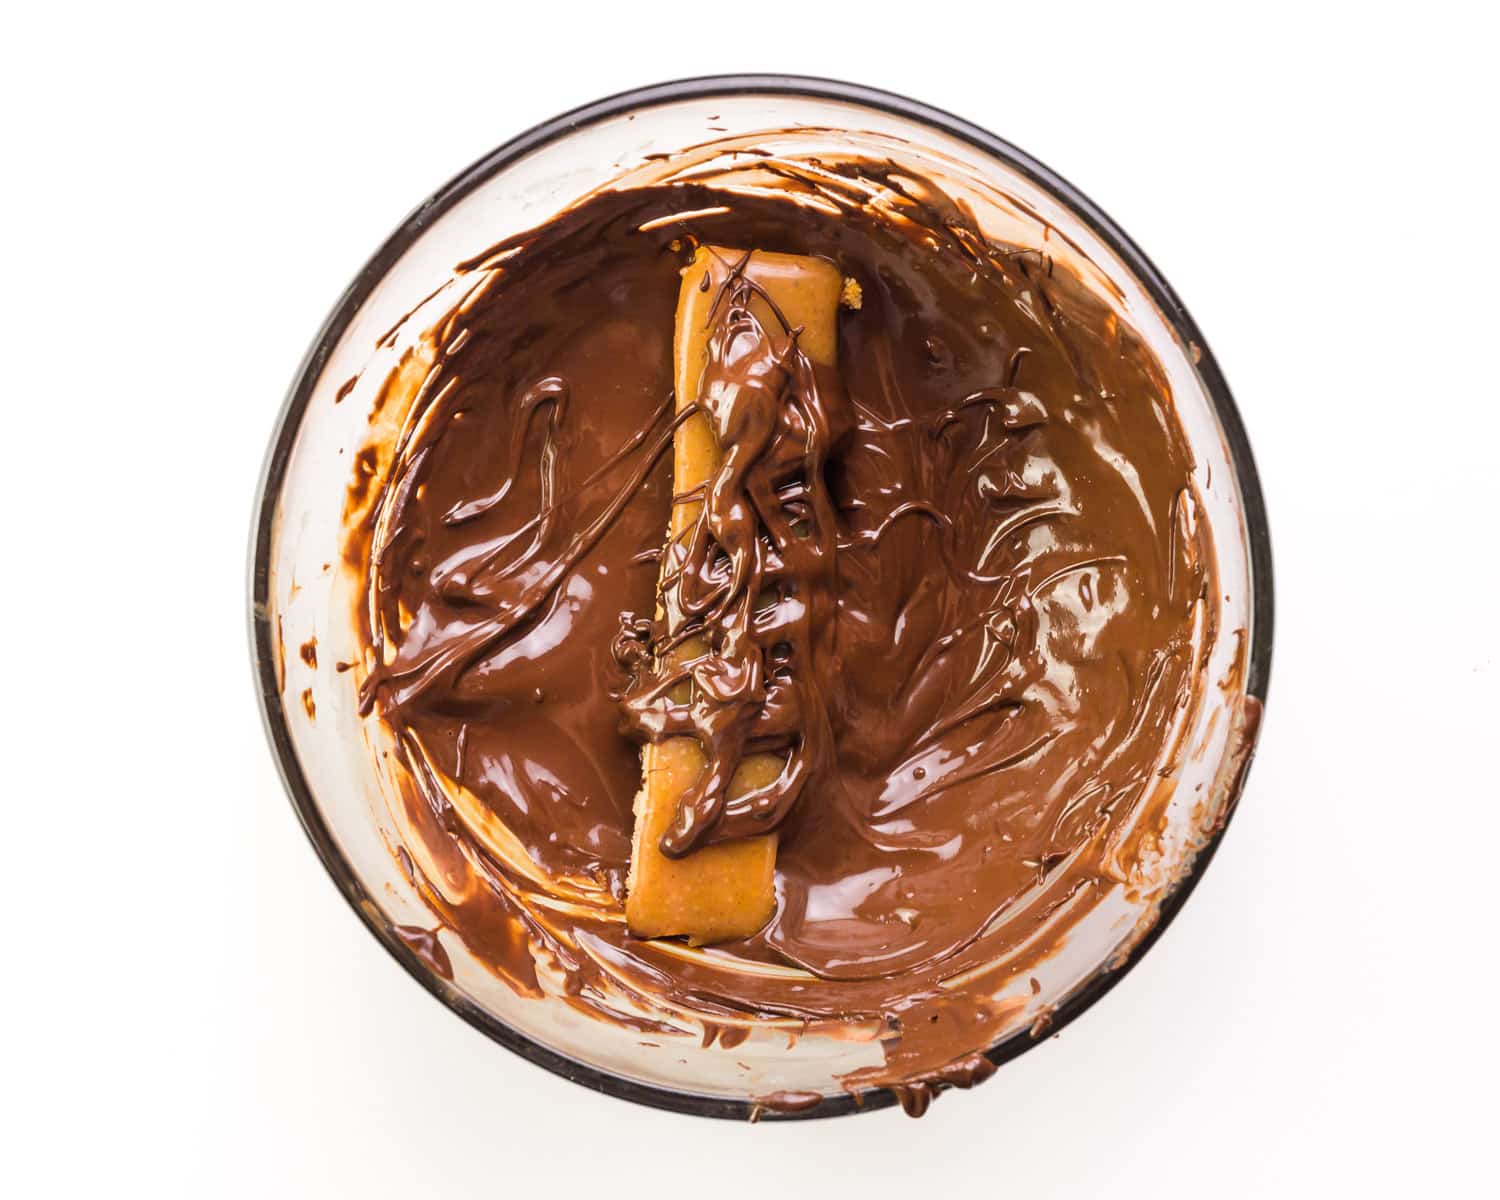 A caramel bar sits in a bowl with melted chocolate, the top of the bar has been drizzled with chocolate.